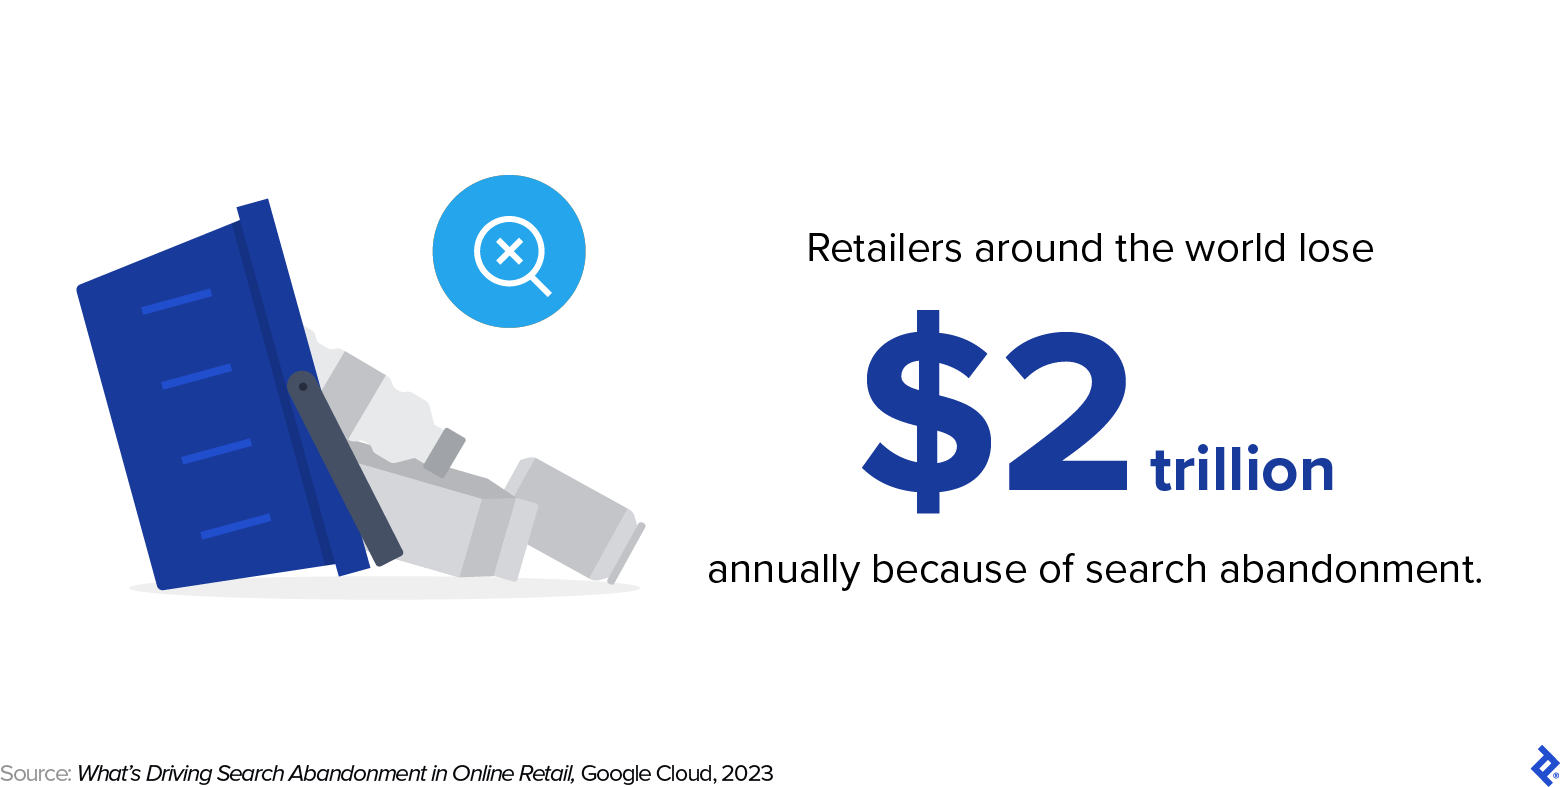 A tipped-over shopping basket with a search error icon states that retailers lose more than $2 trillion annually in abandoned searches.